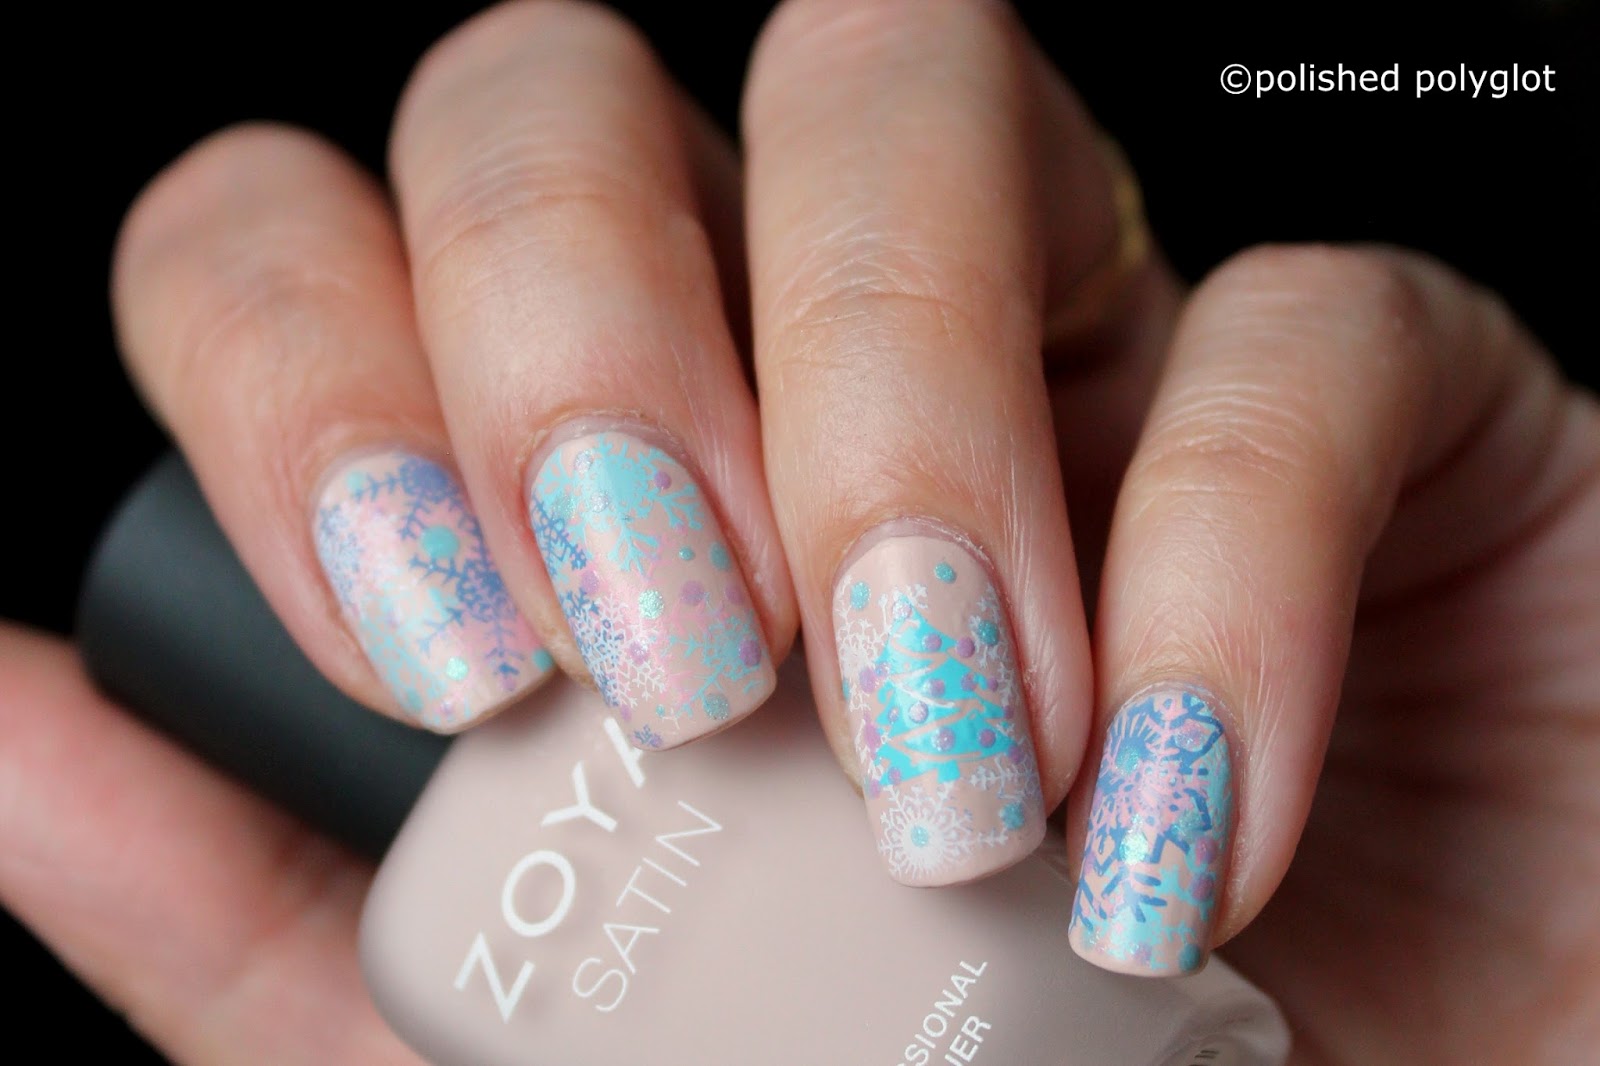 10. Pretty Pastel Nail Art Pictures - wide 7